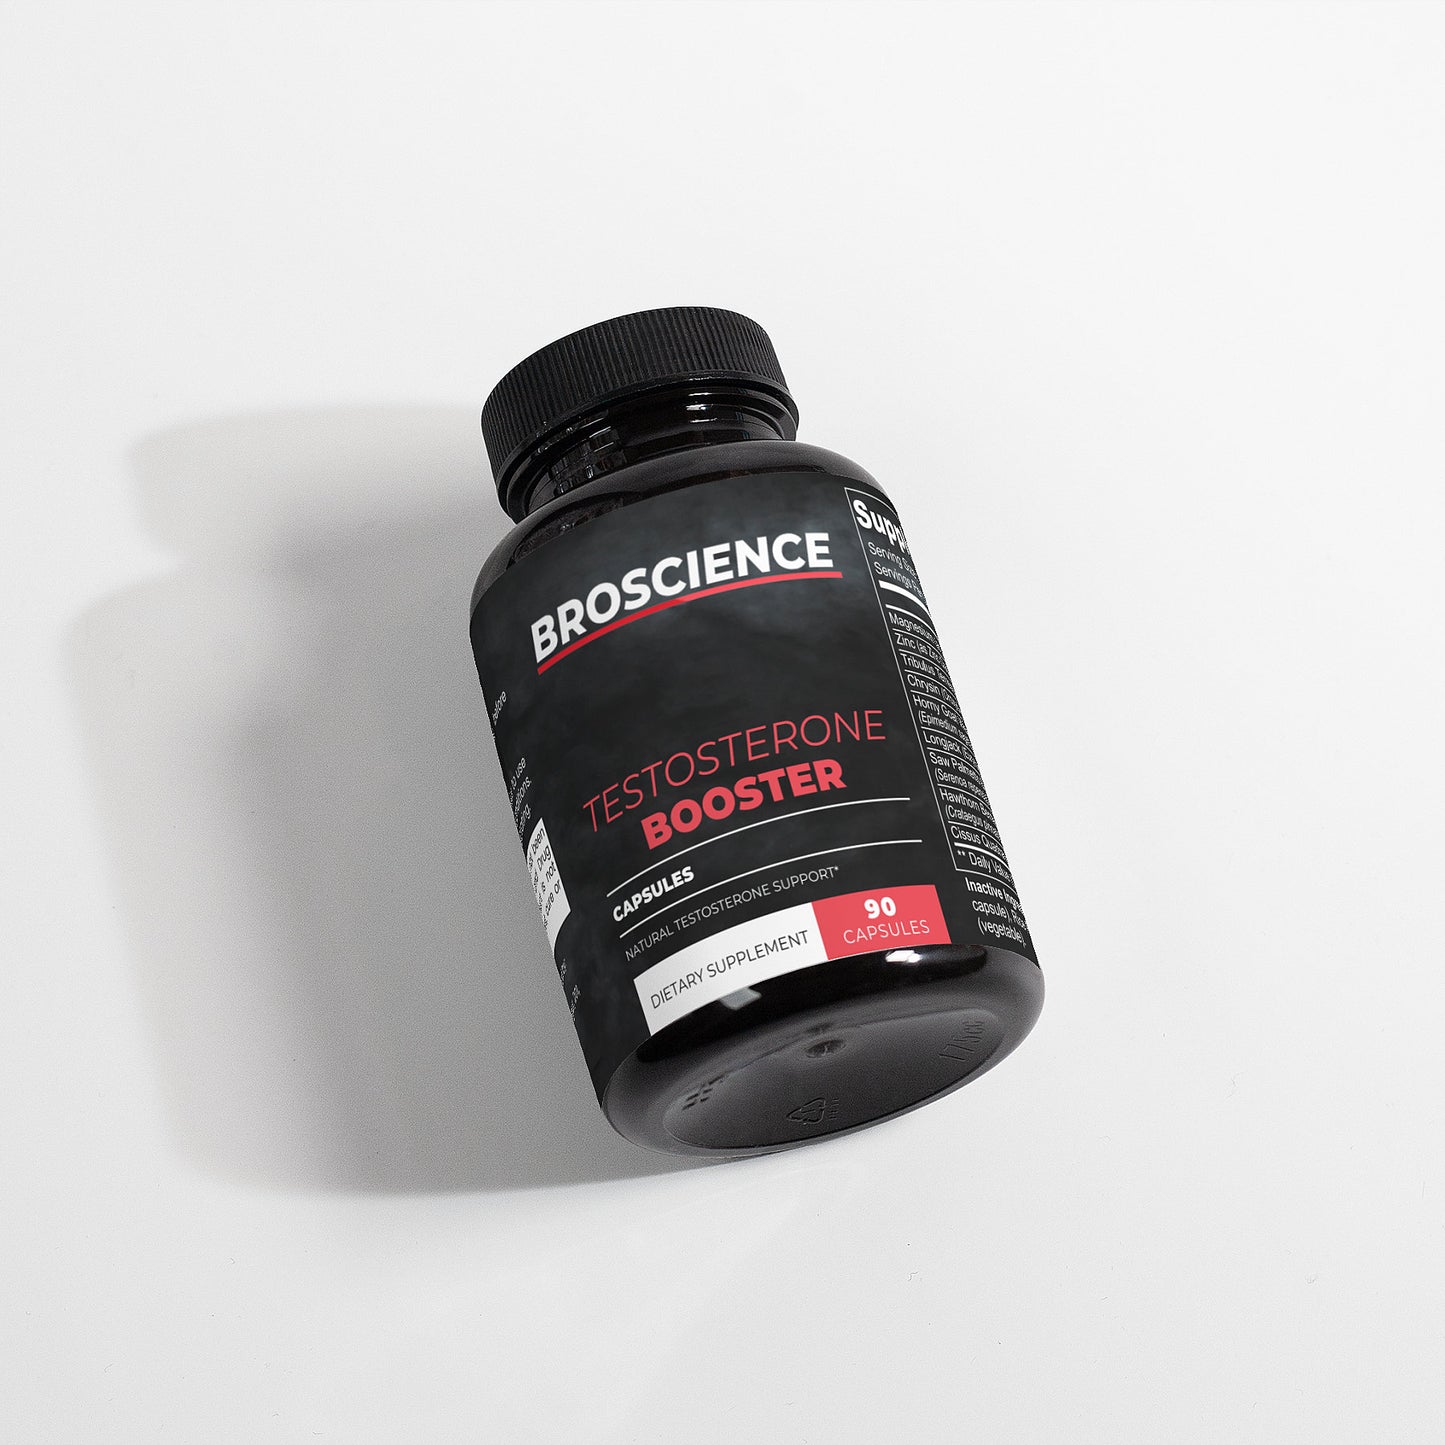 Testosterone Booster For Muscle Gains by Broscience